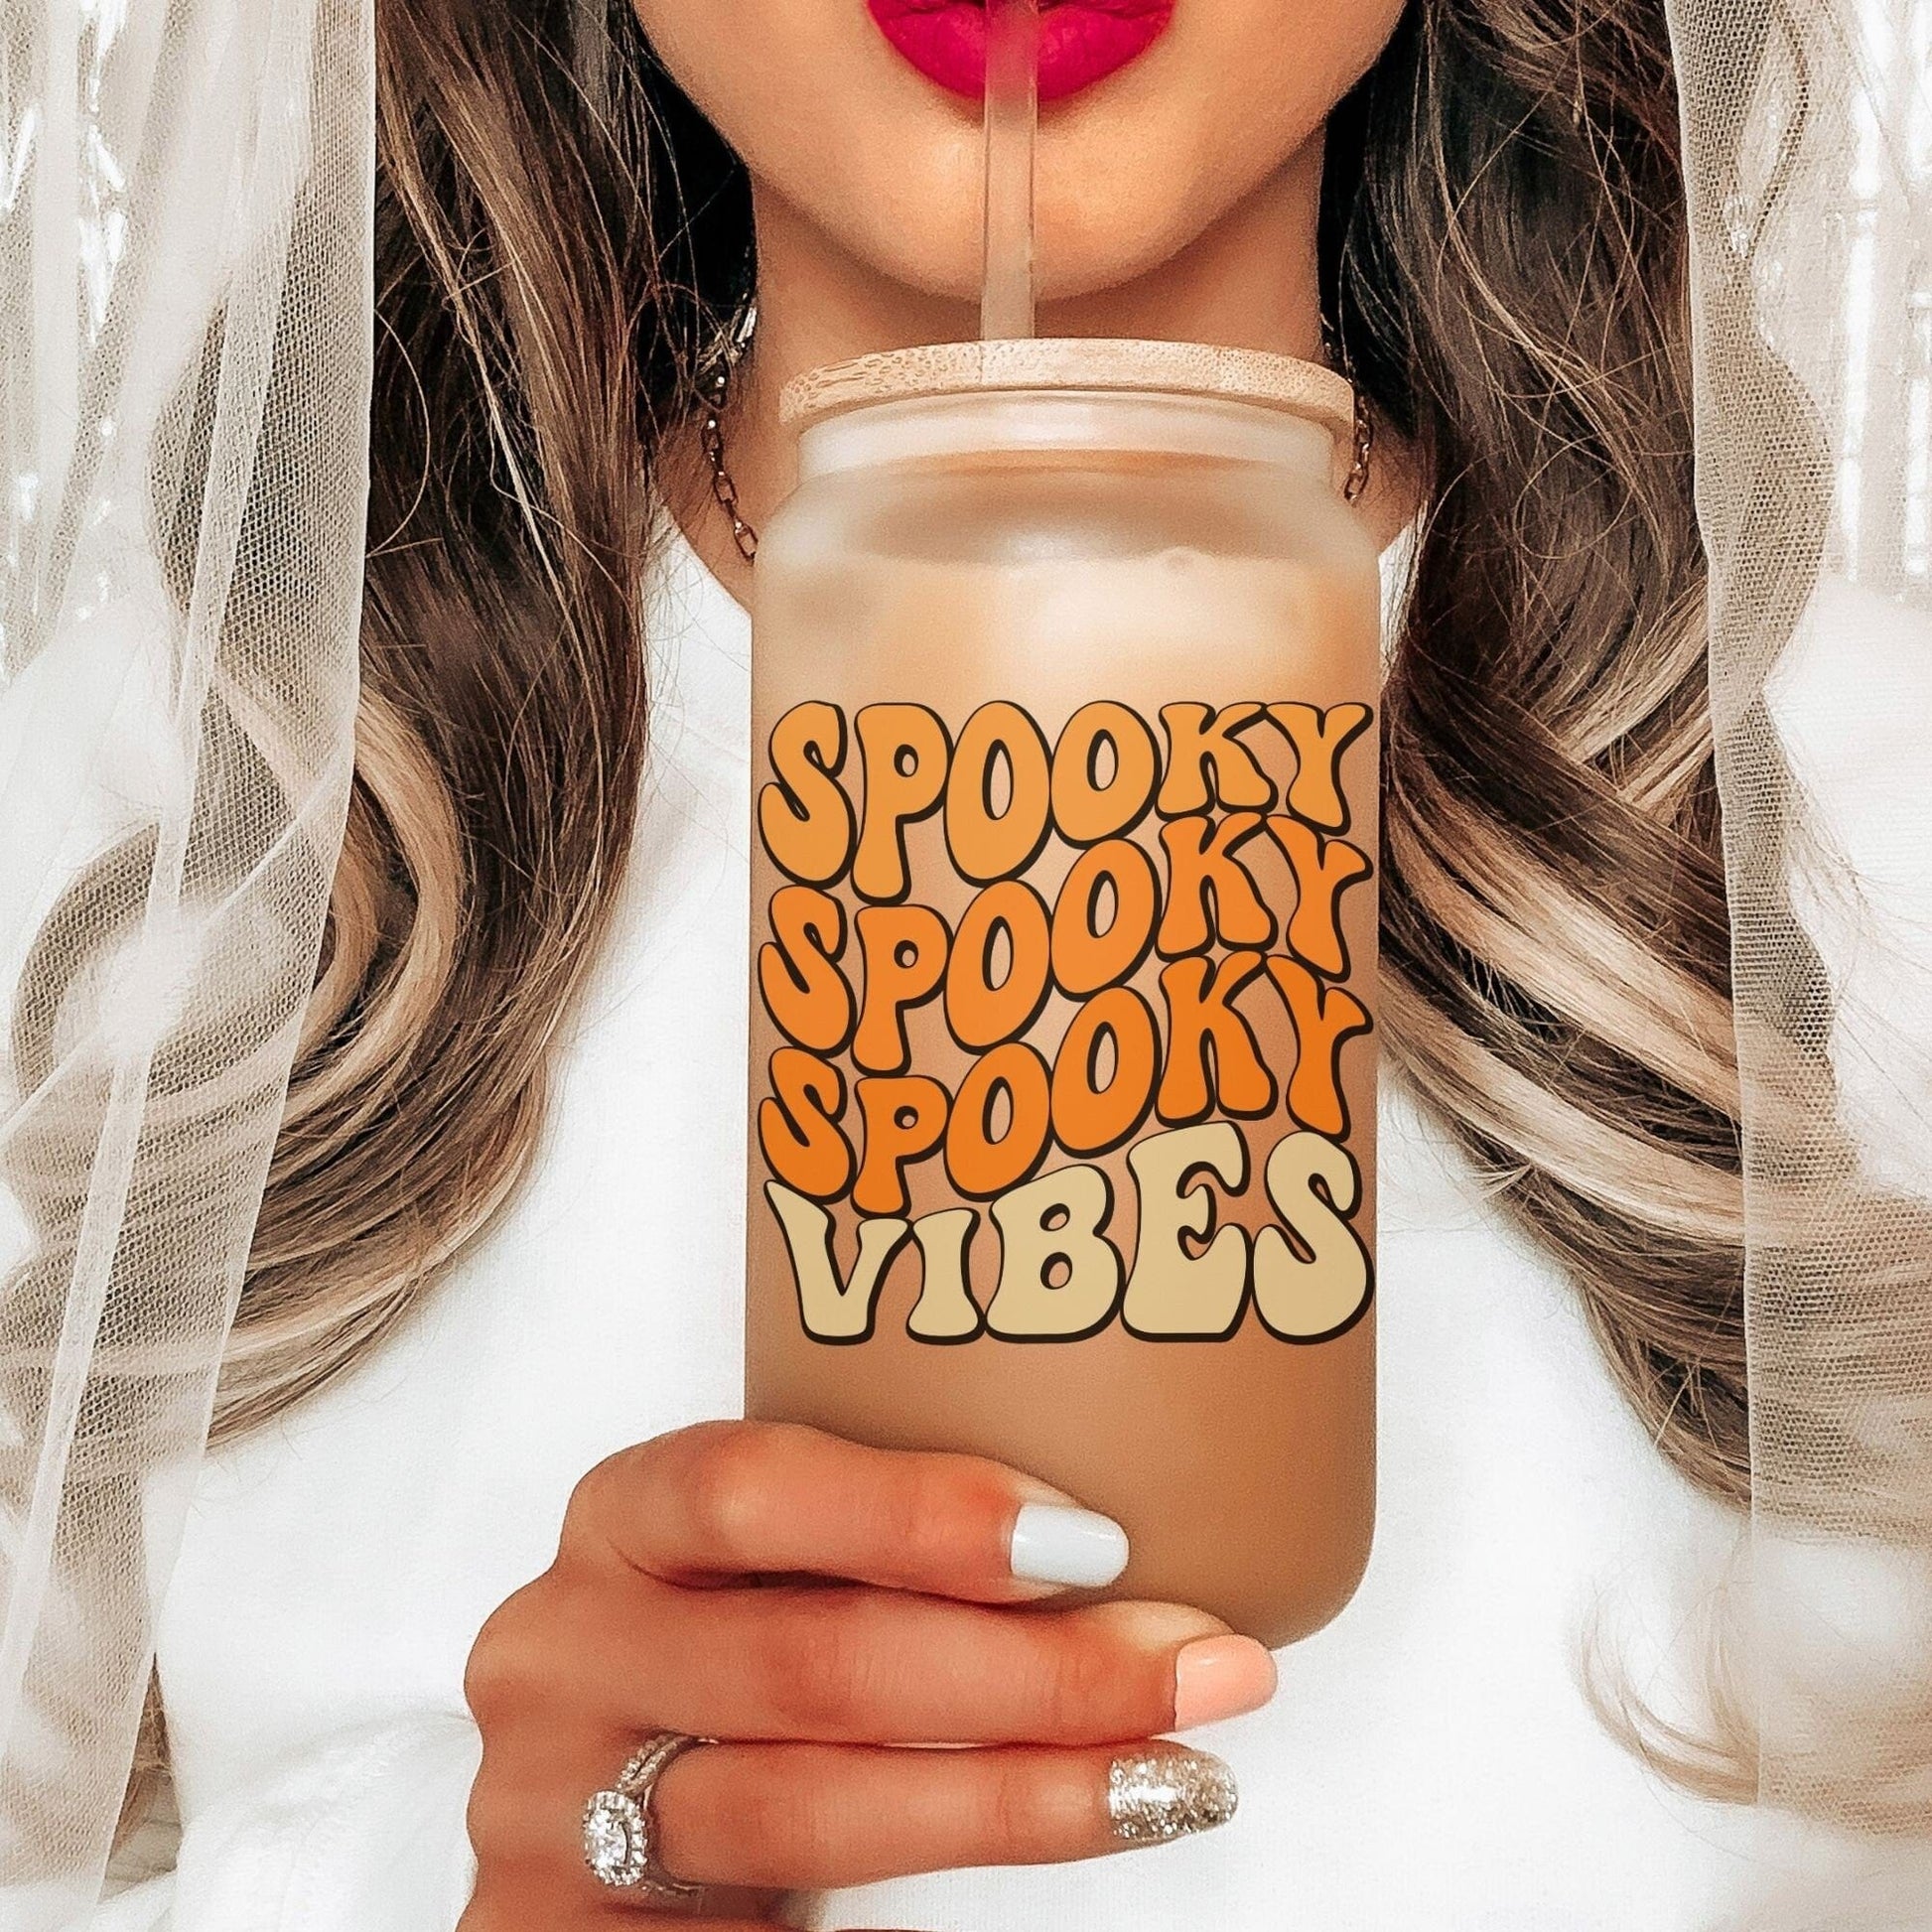 Spooky Vibes Halloween Iced Coffee Cup Cute Retro Halloween Frosted Tumbler with Straw Fall Vibes 16oz beer Glass Can Tumbler Gift for women